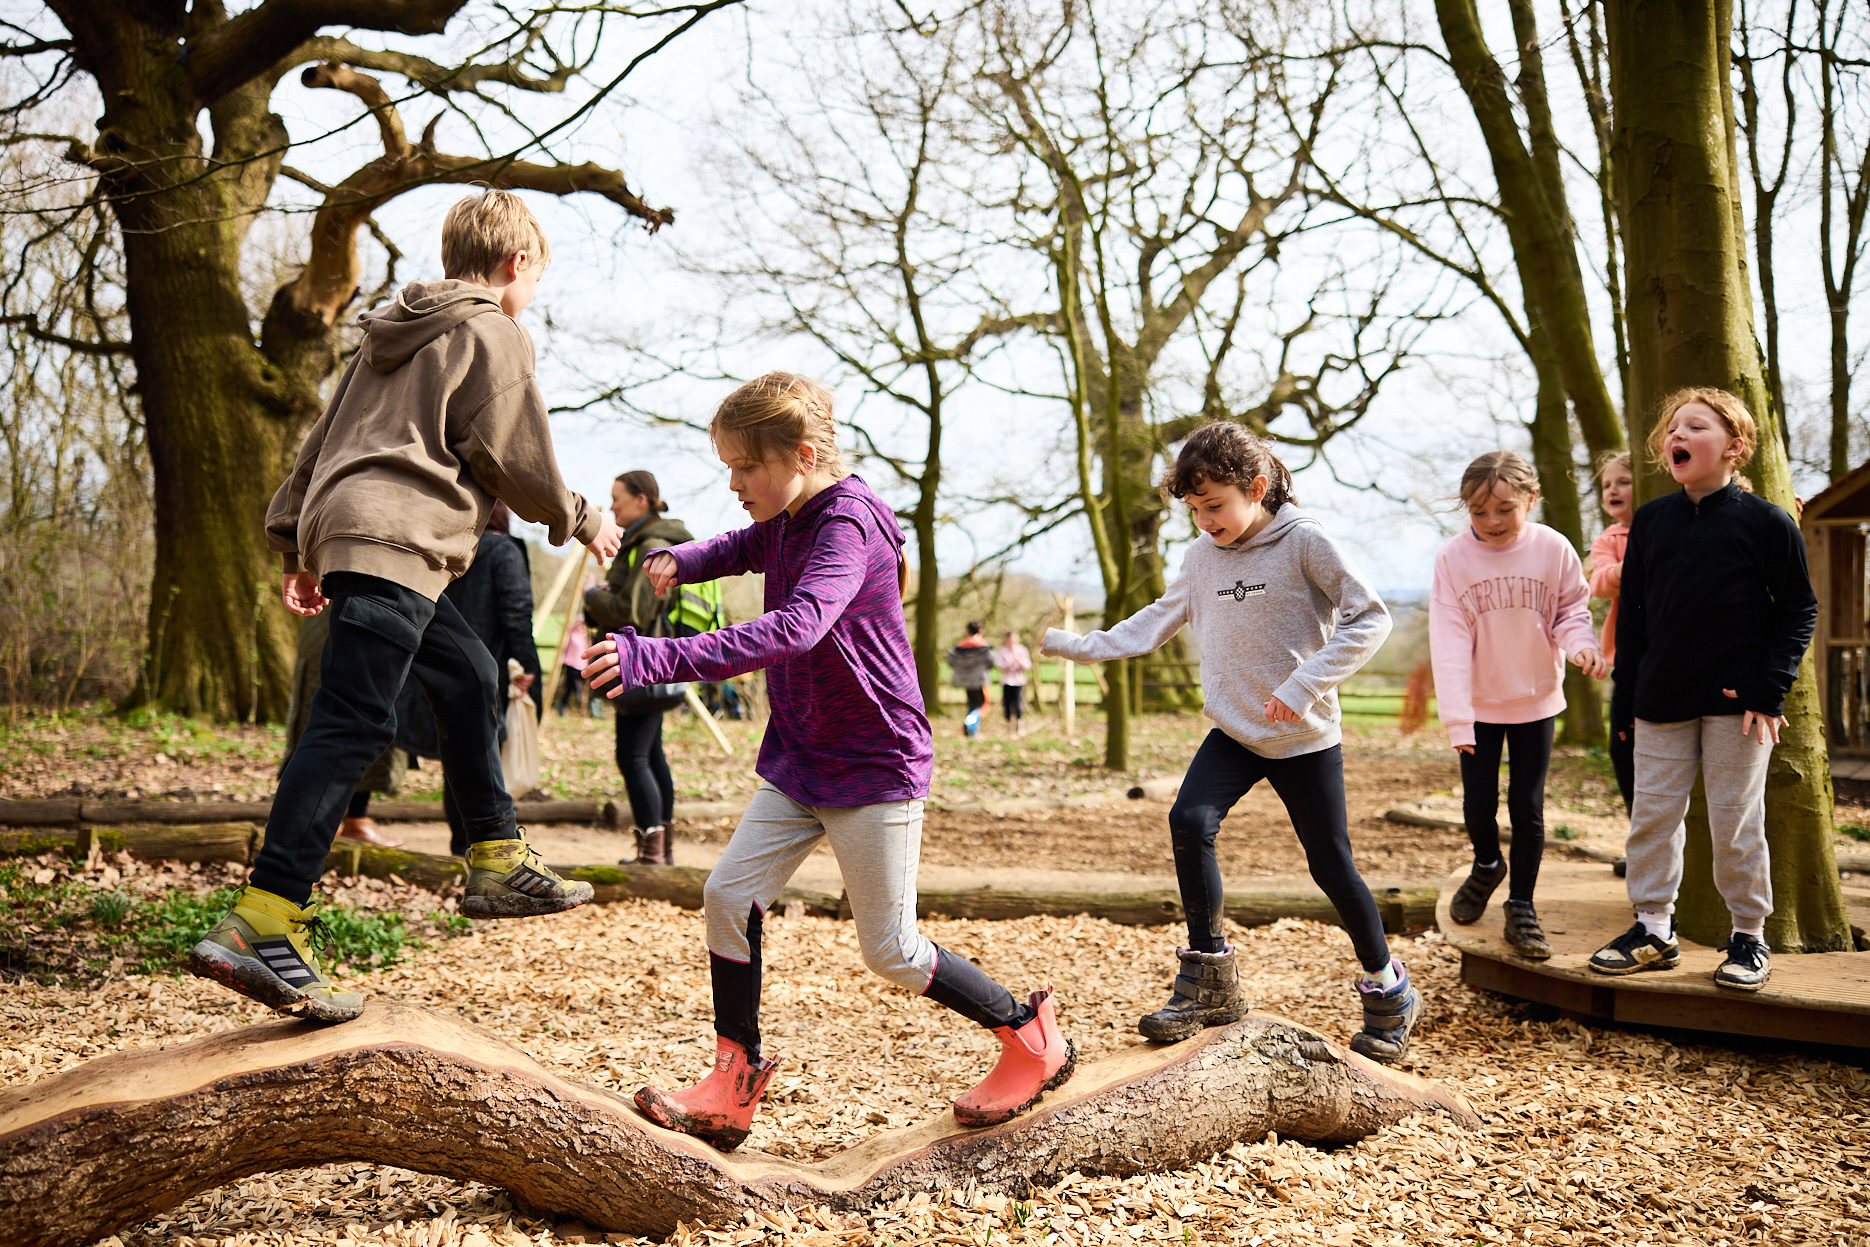 A group of children playing on natural stepping stones and branches.